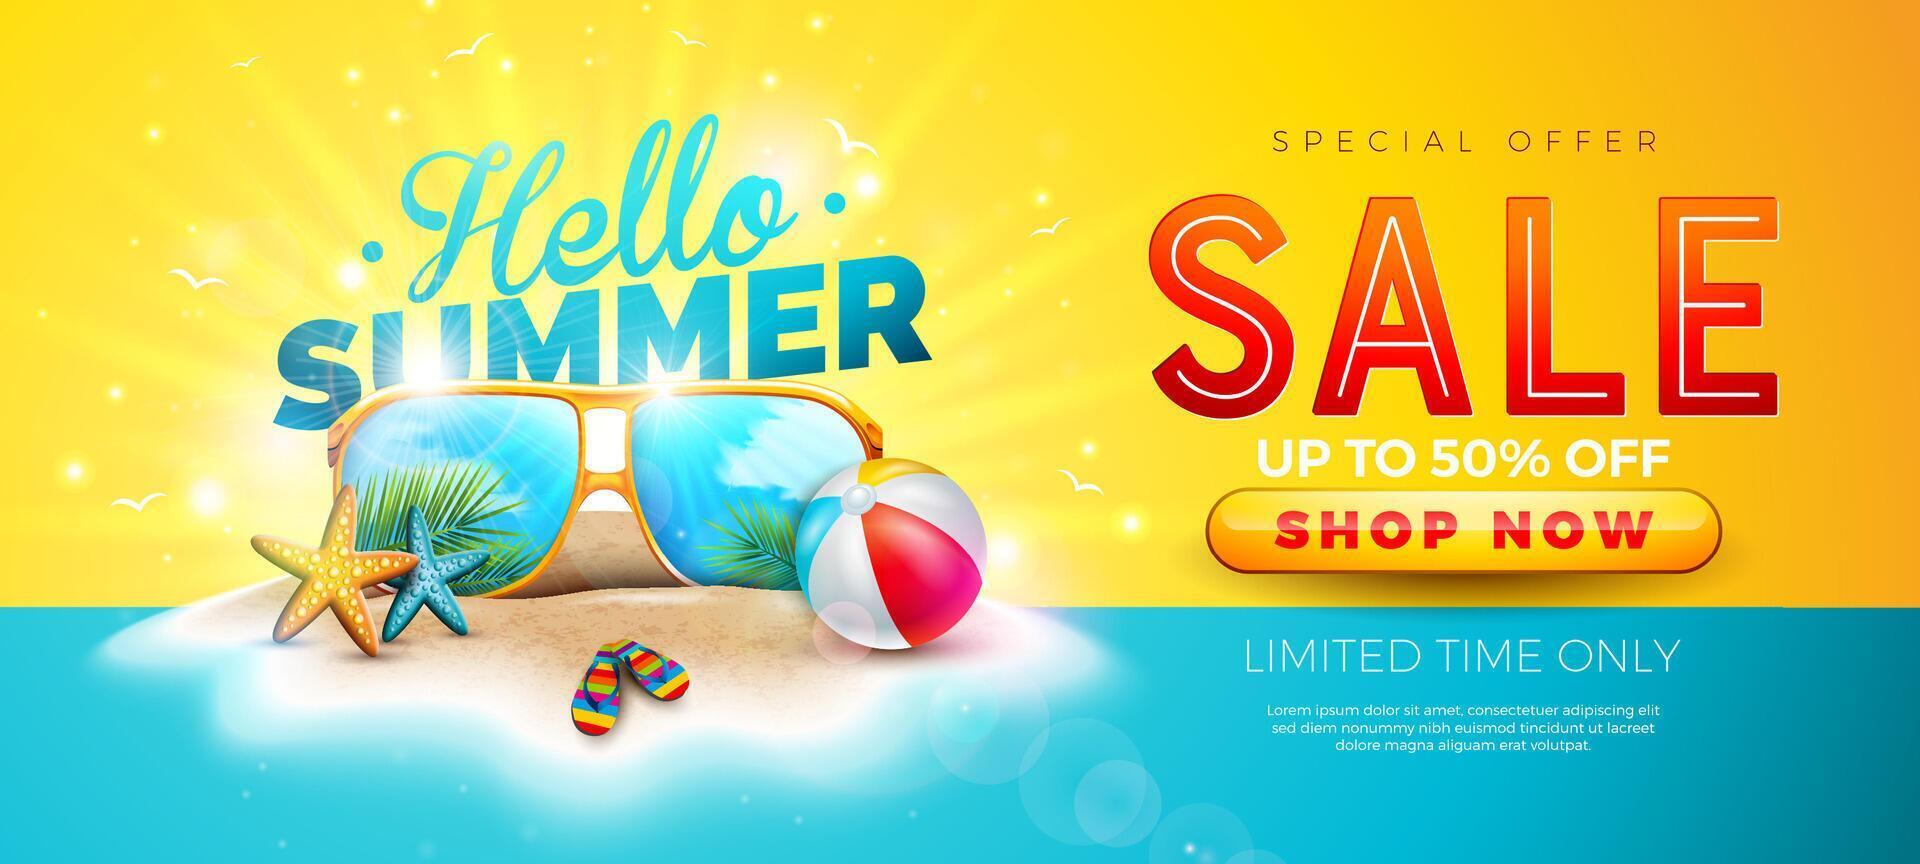 Summer Sale Design with Sunglasses, Beach Ball and Typography Lettering on Blue and Yellow Background. Tropical Illustration with Special Offer Label for Coupon, Voucher, Banner, Flyer vector